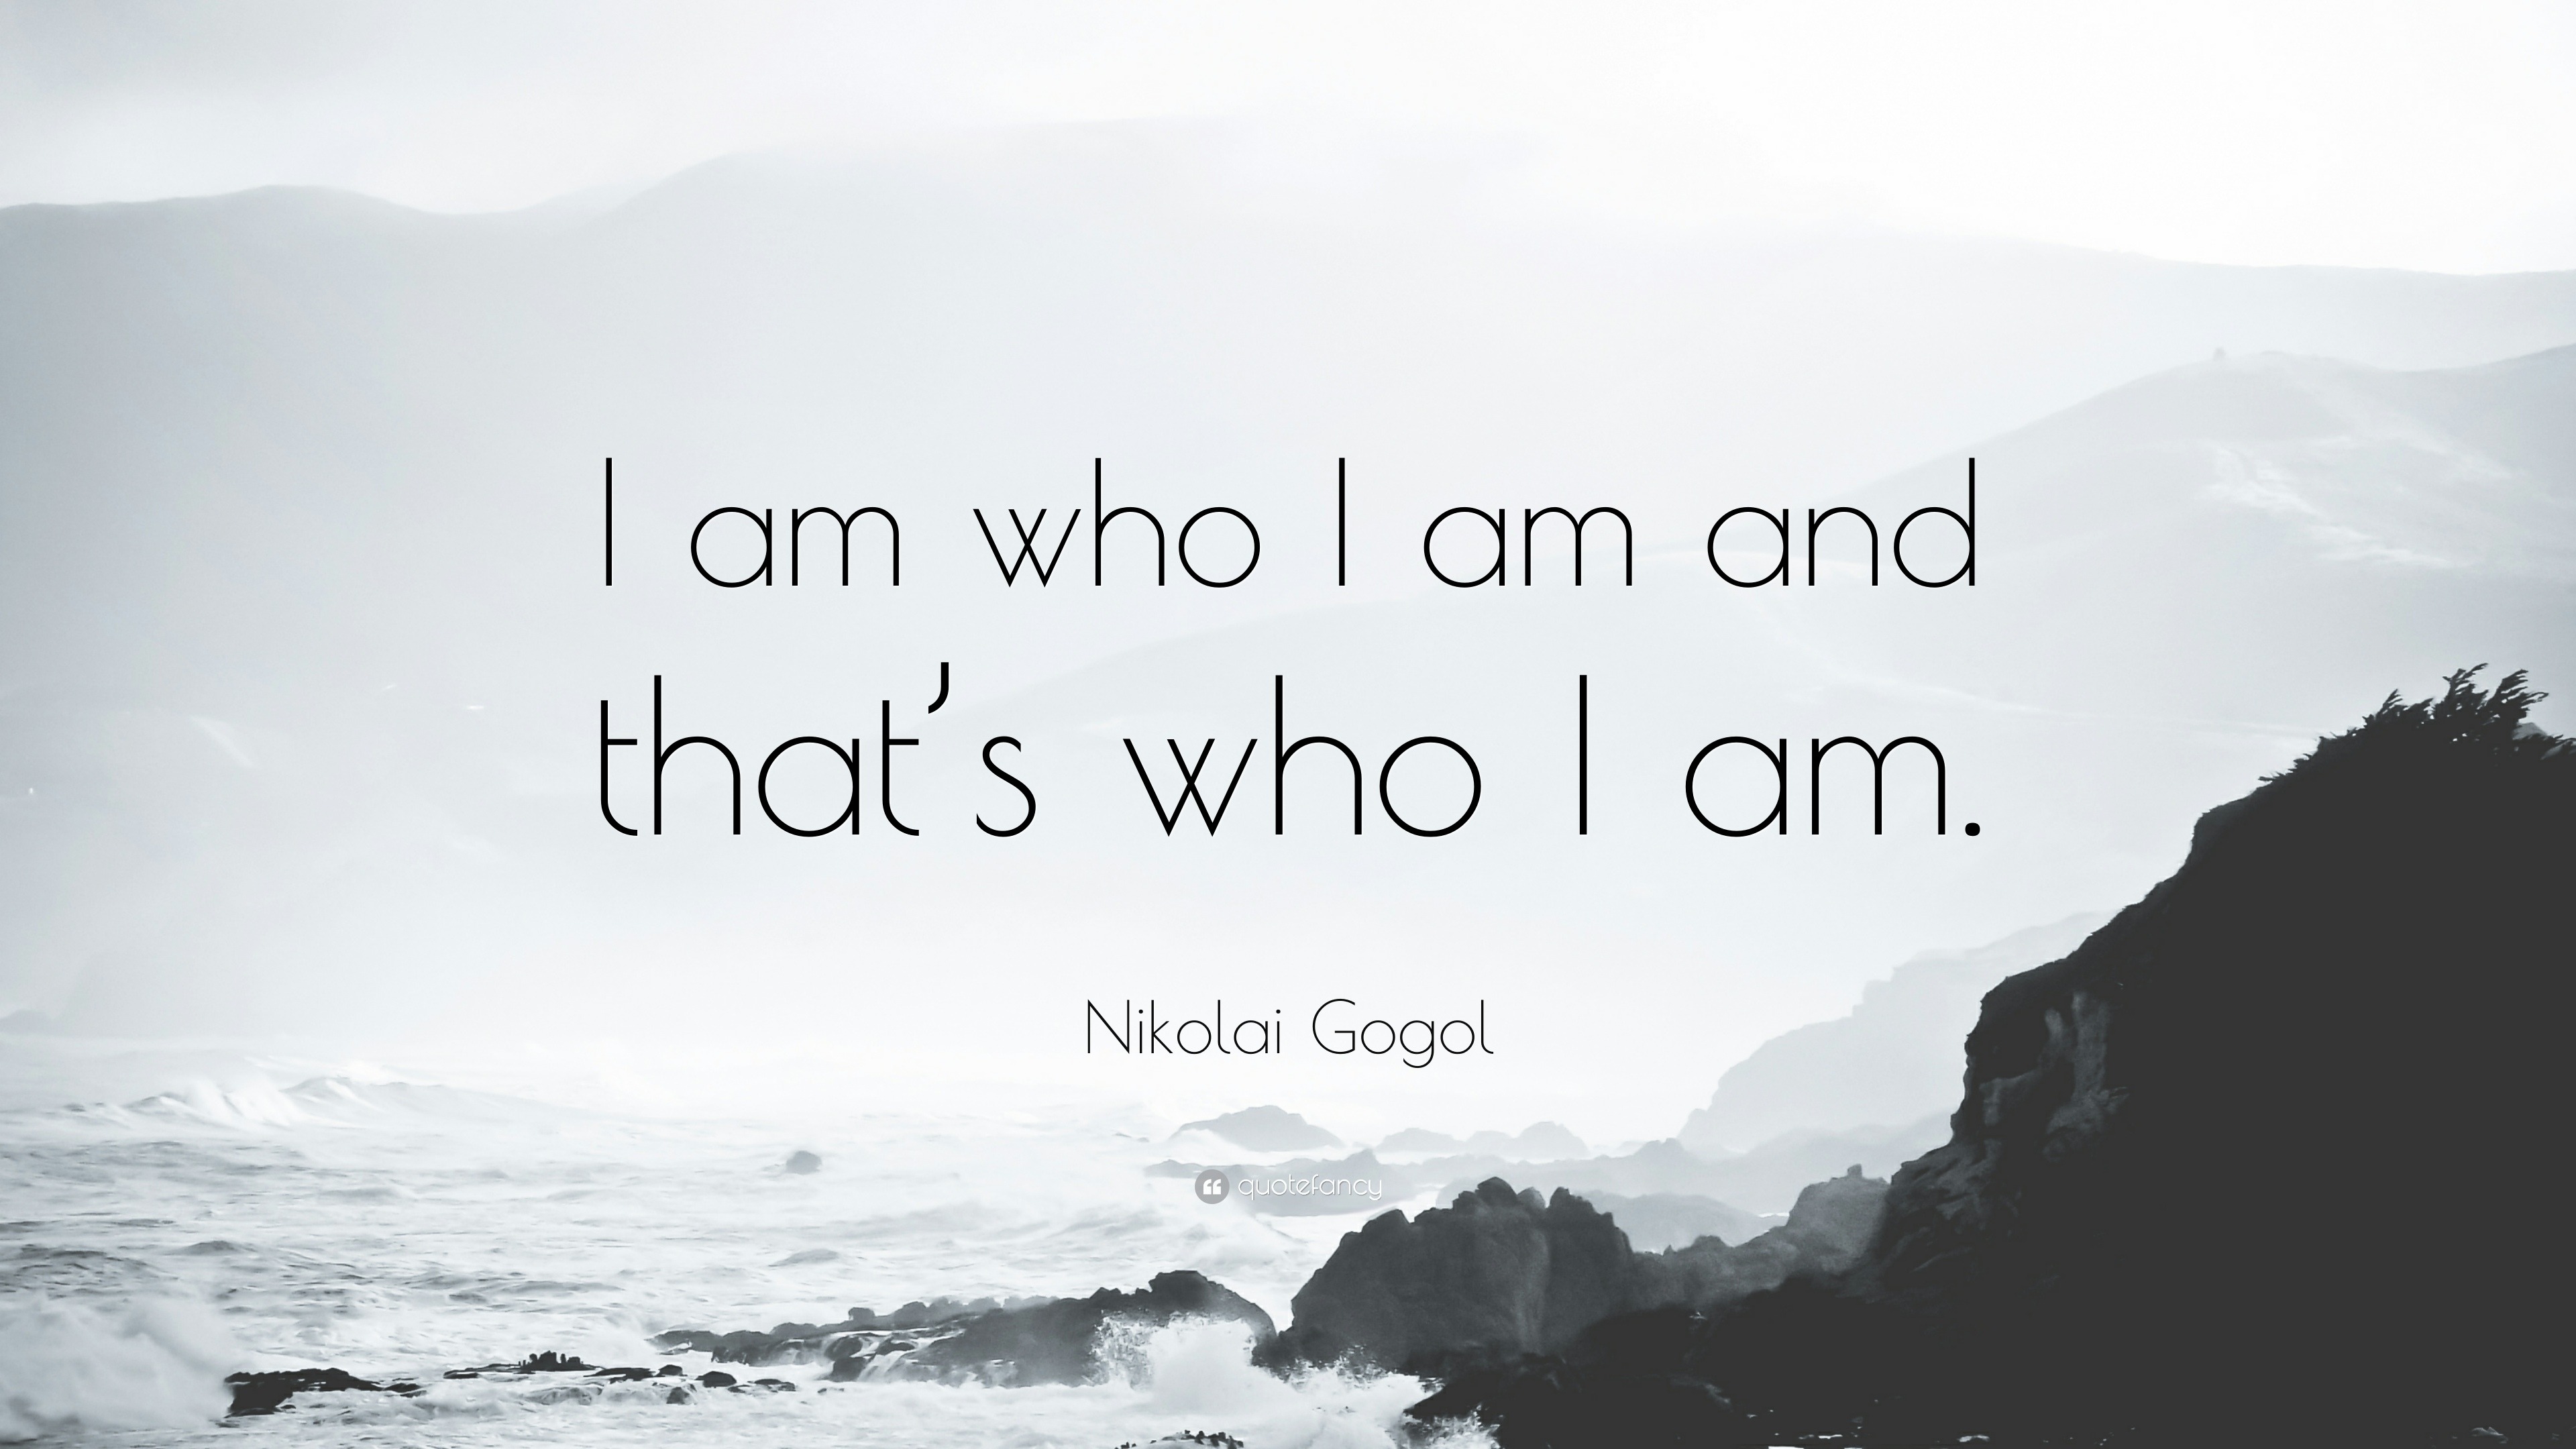 Nikolai Gogol Quote: “I am who I am and that's who I am.”